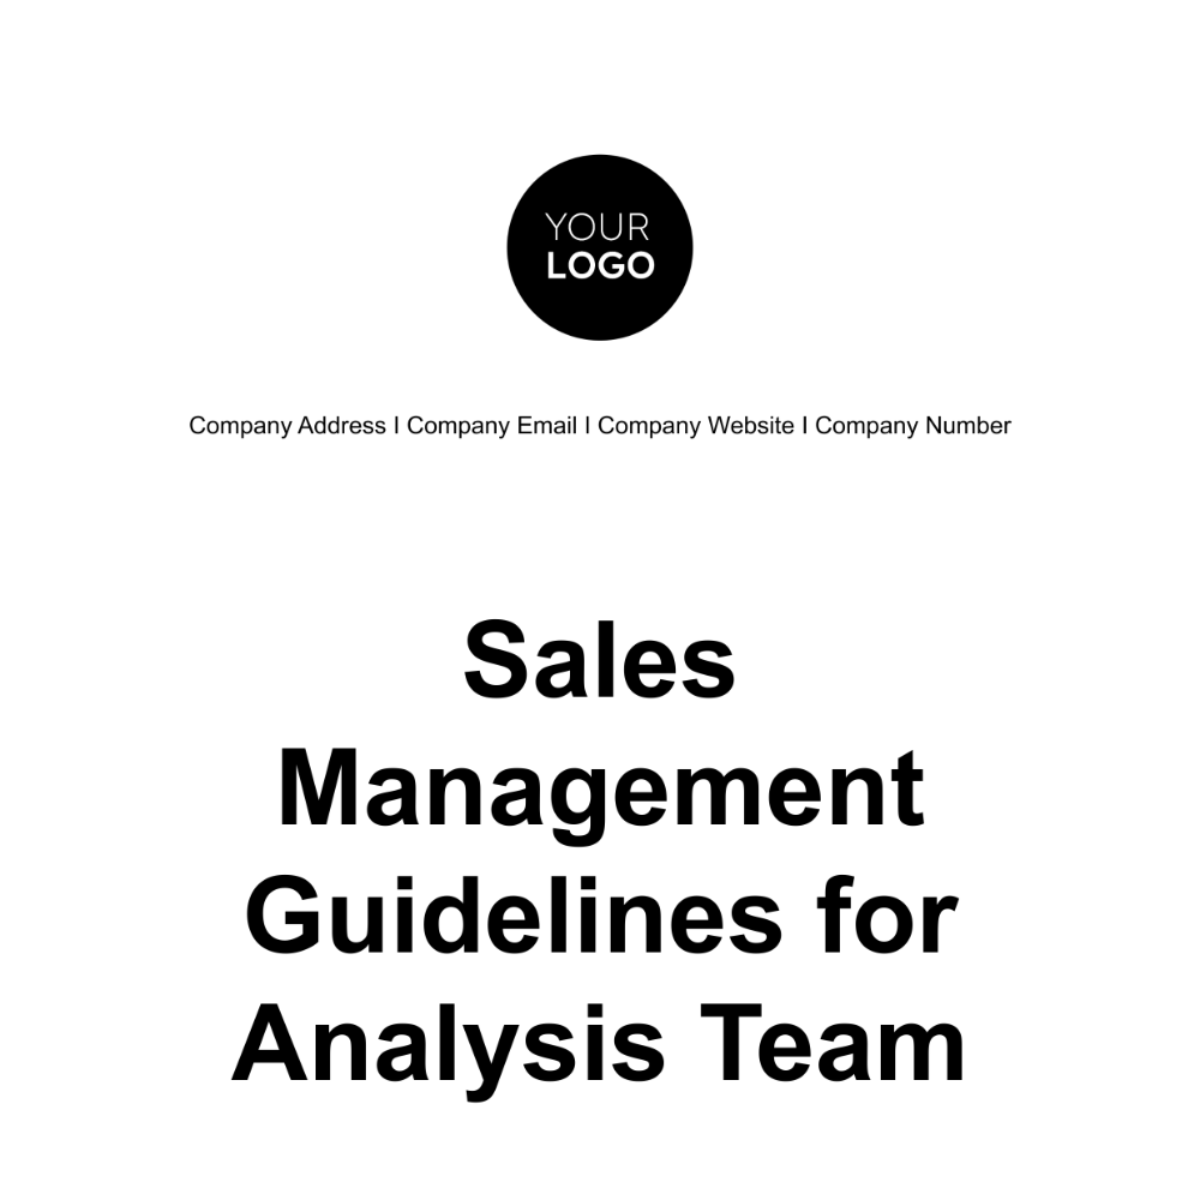 Sales Management Guidelines for Analysis Team Template